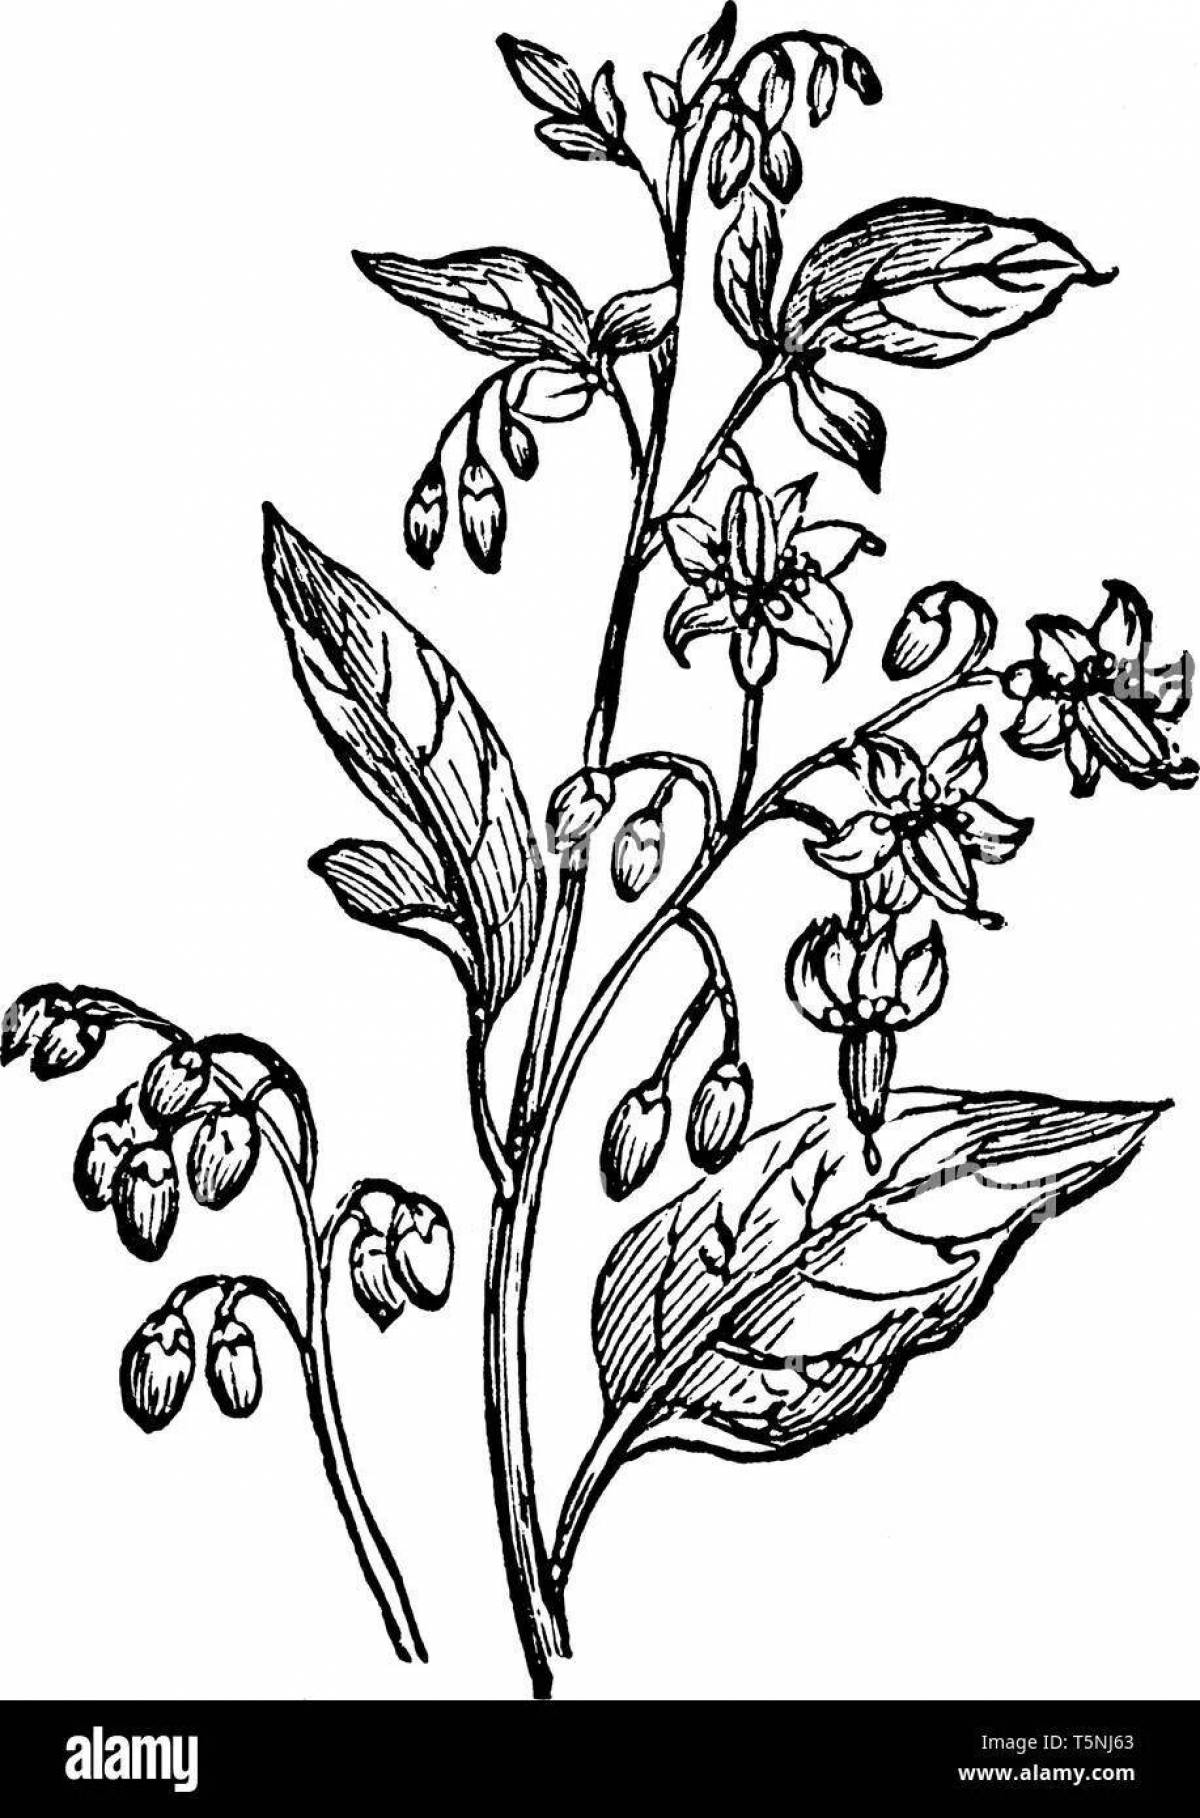 Incredible coloring pages of poisonous plants for kids